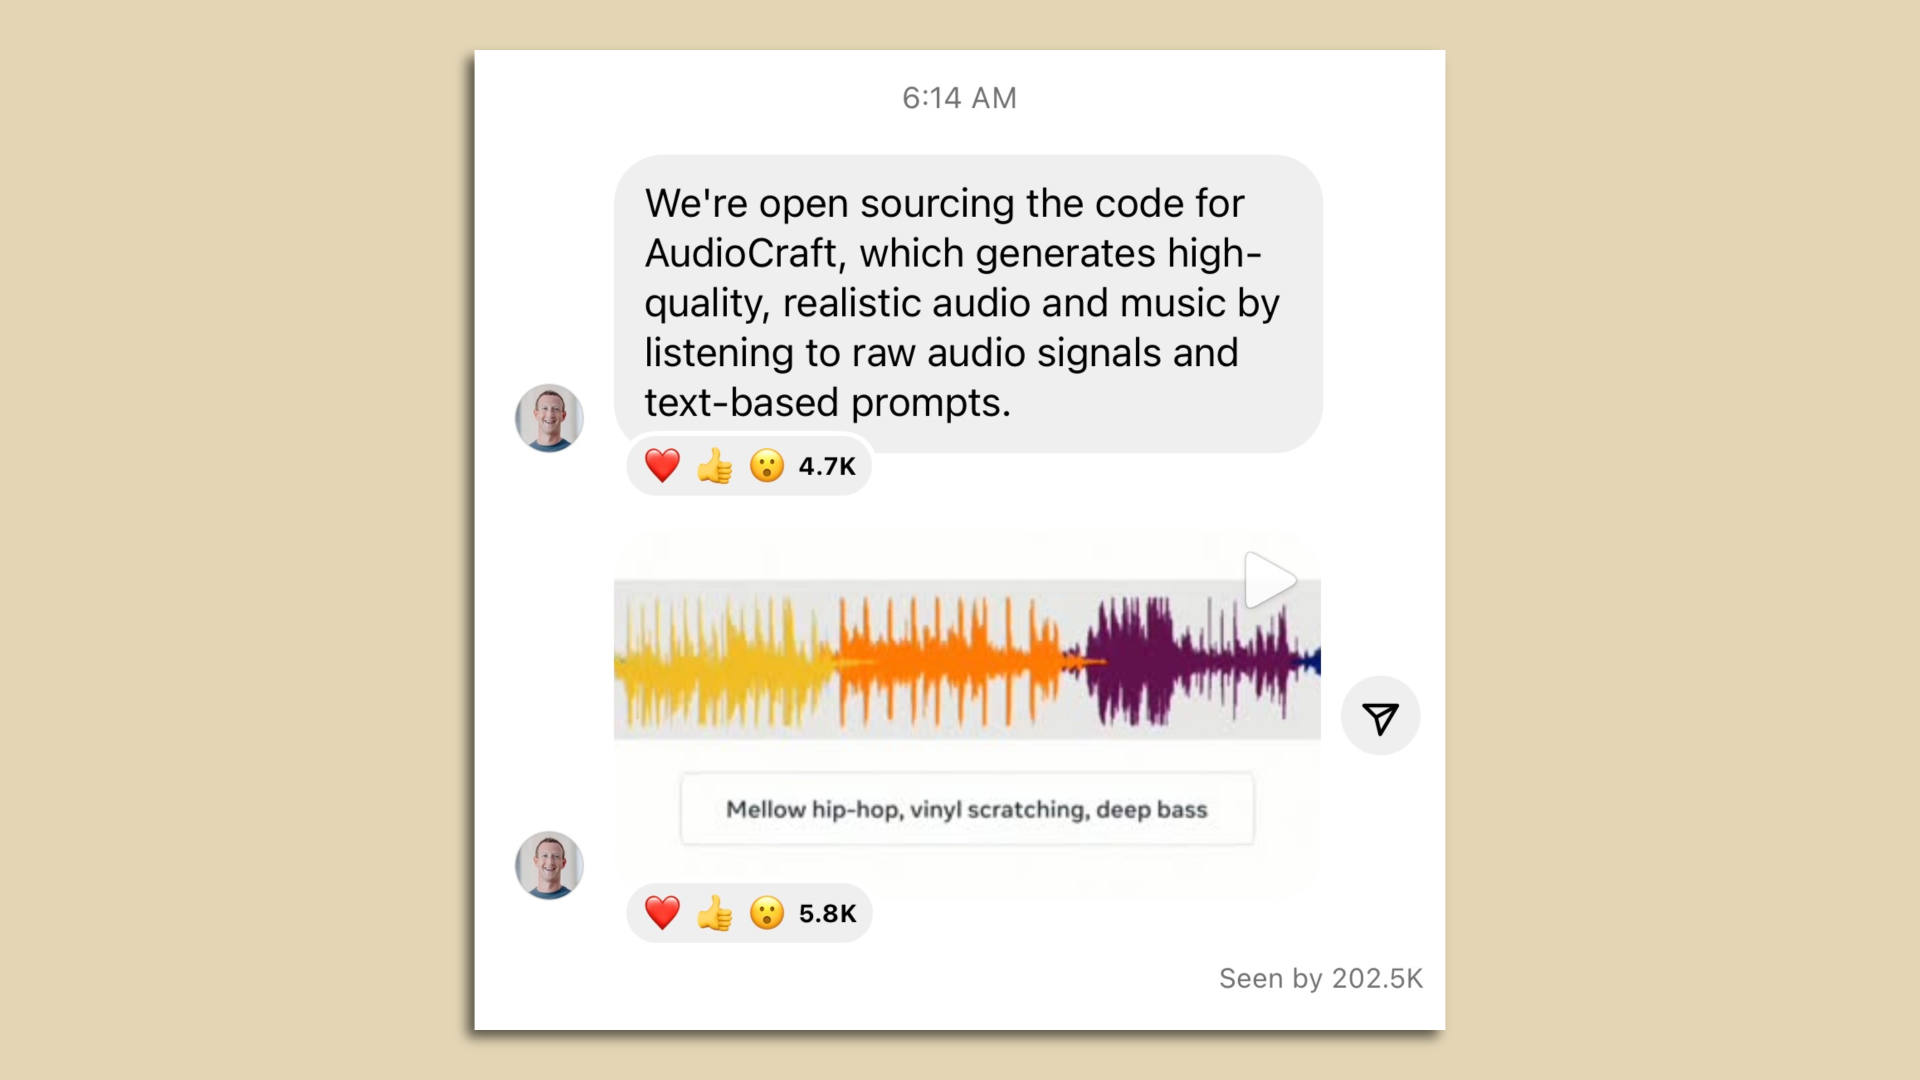 Meta CEO Mark Zuckerberg announced the release of AudioCraft on Wednesday.